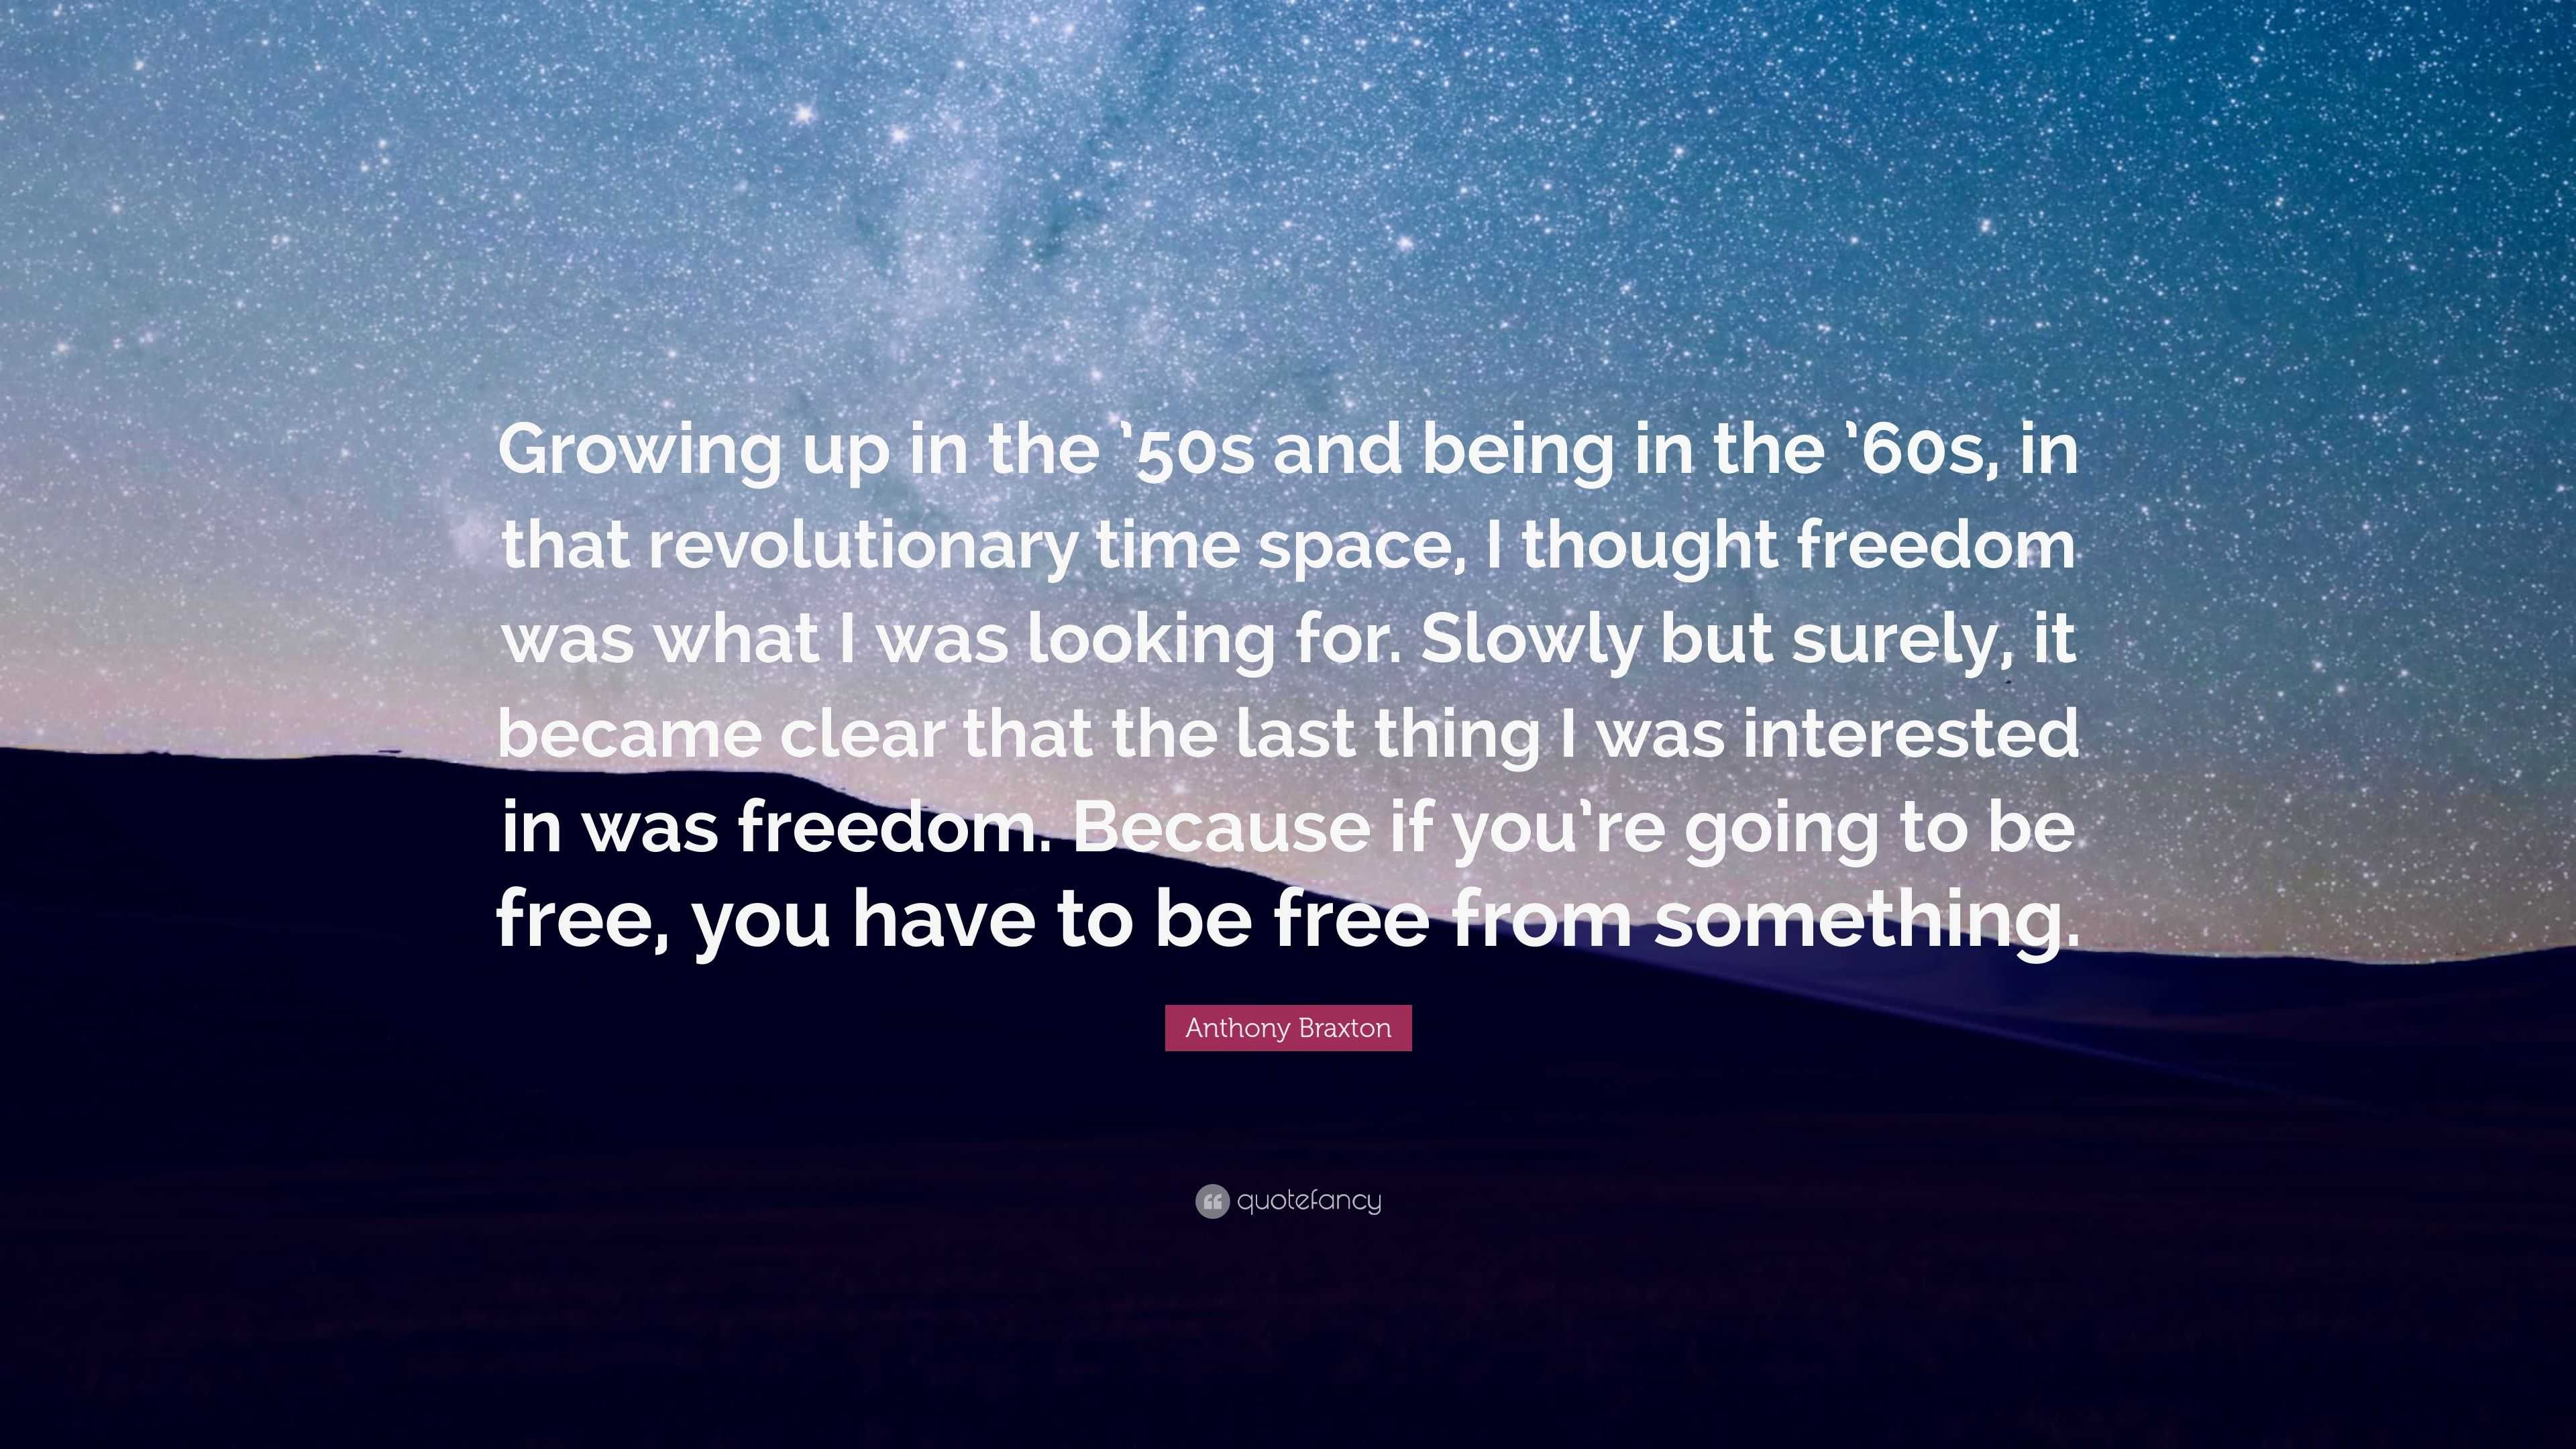 Growing up in the 50s & 60s